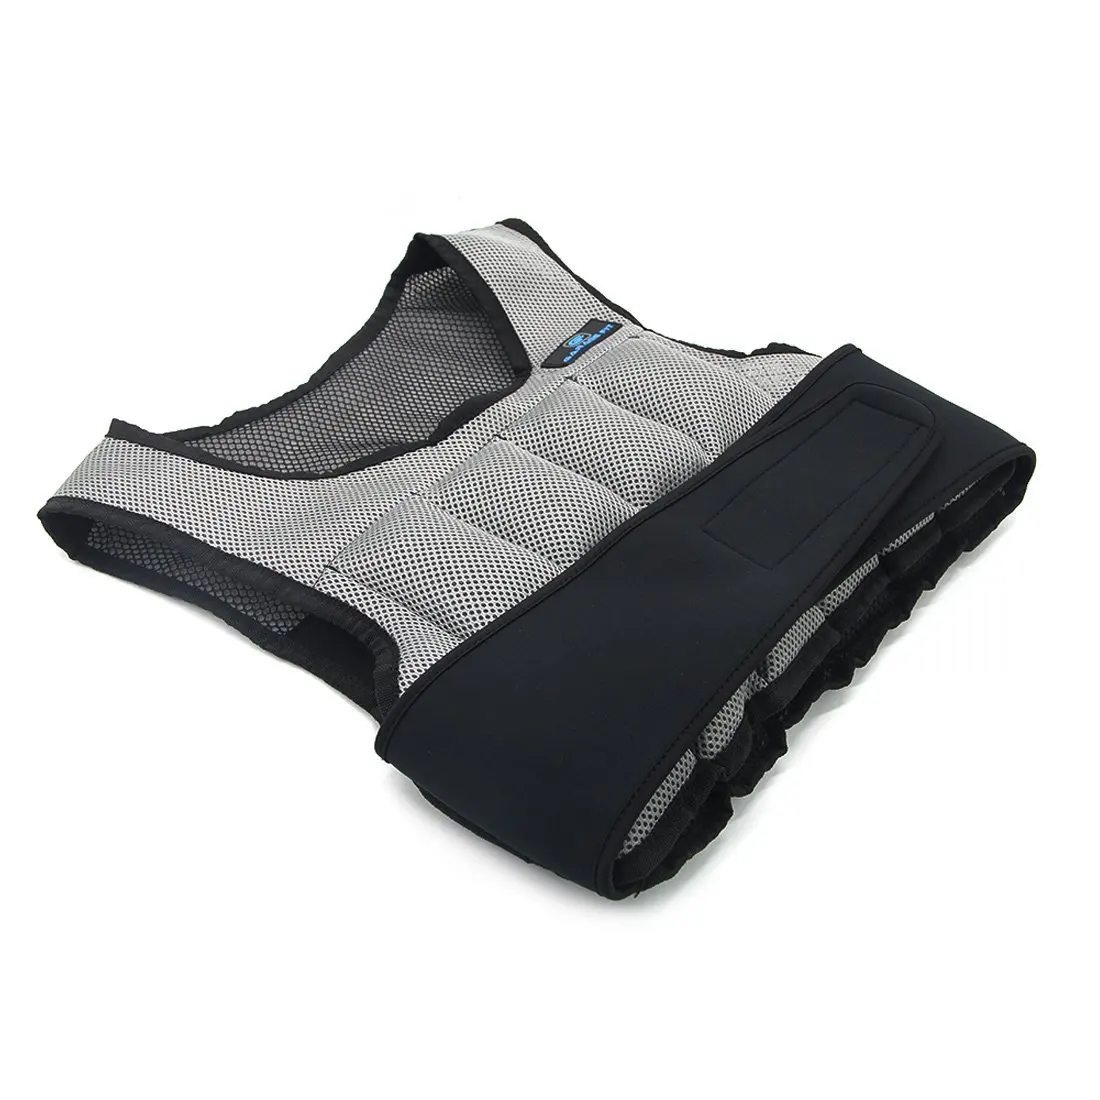 Buy Weight Vest For Training - Weighted Vest - Weighted Training Vest ...